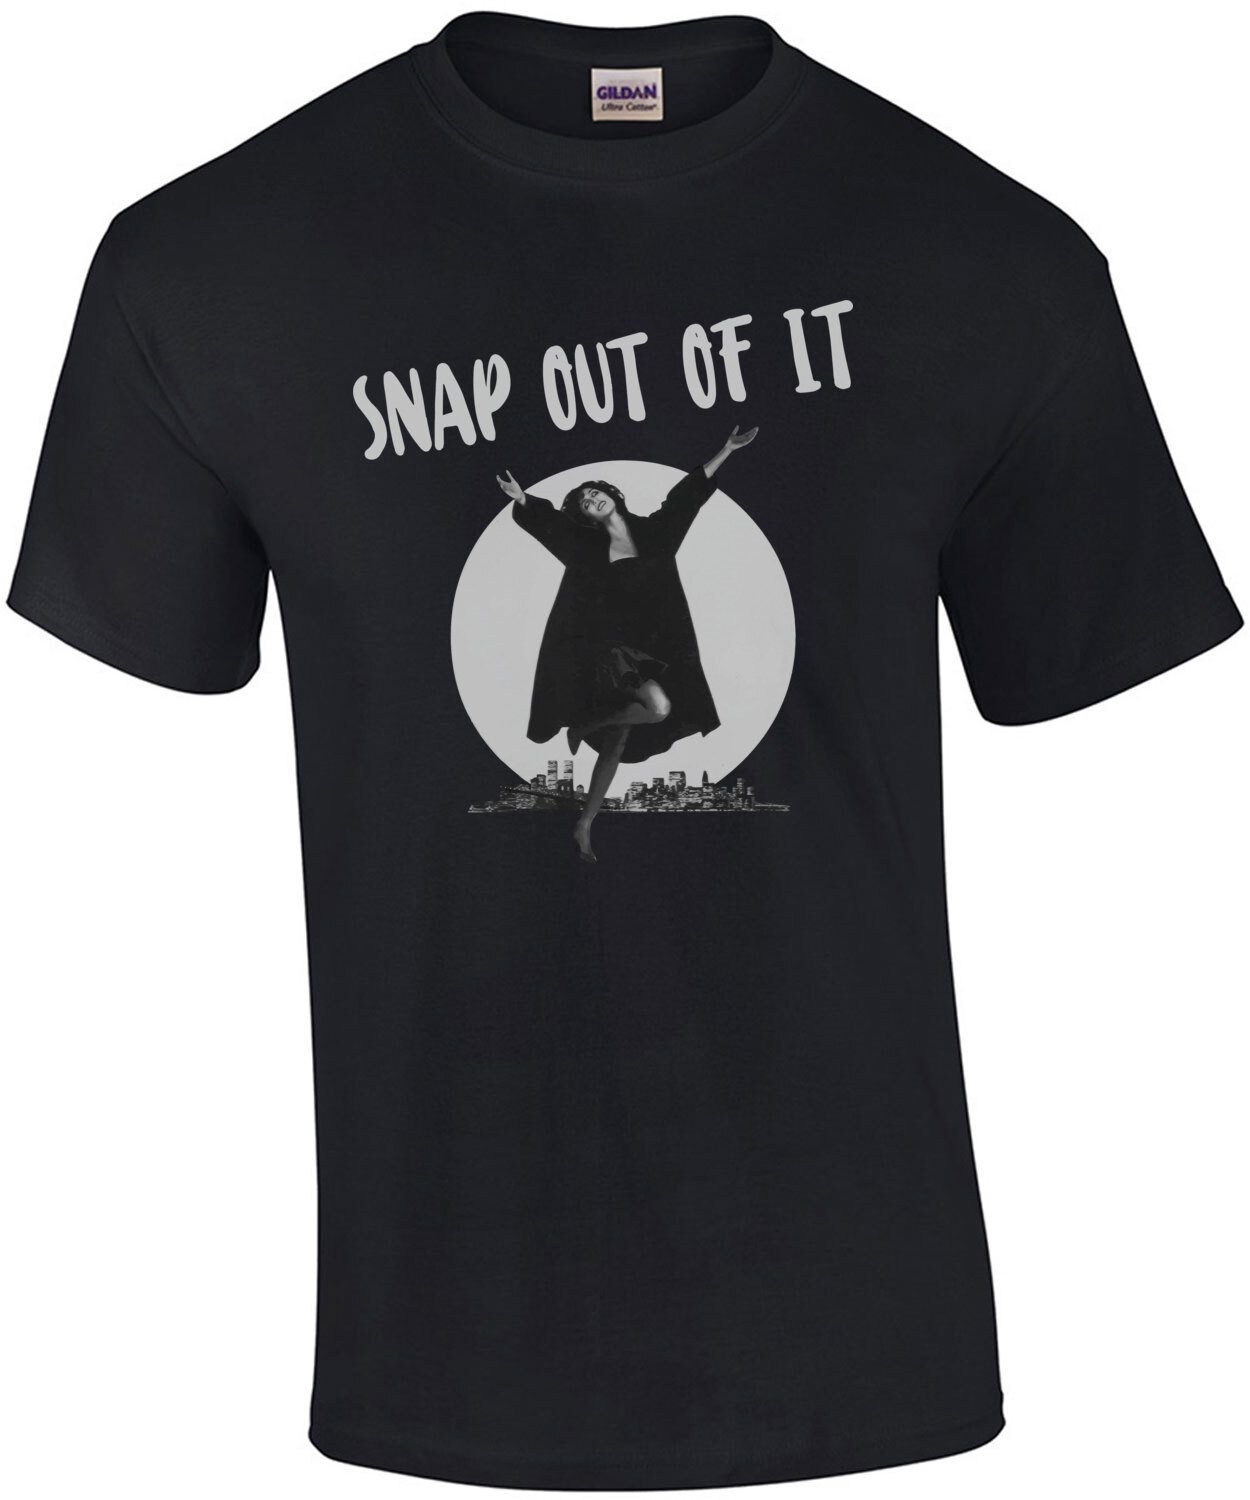 Snap Out Of It - Cher - Moonstruck - 80's T-Shirt